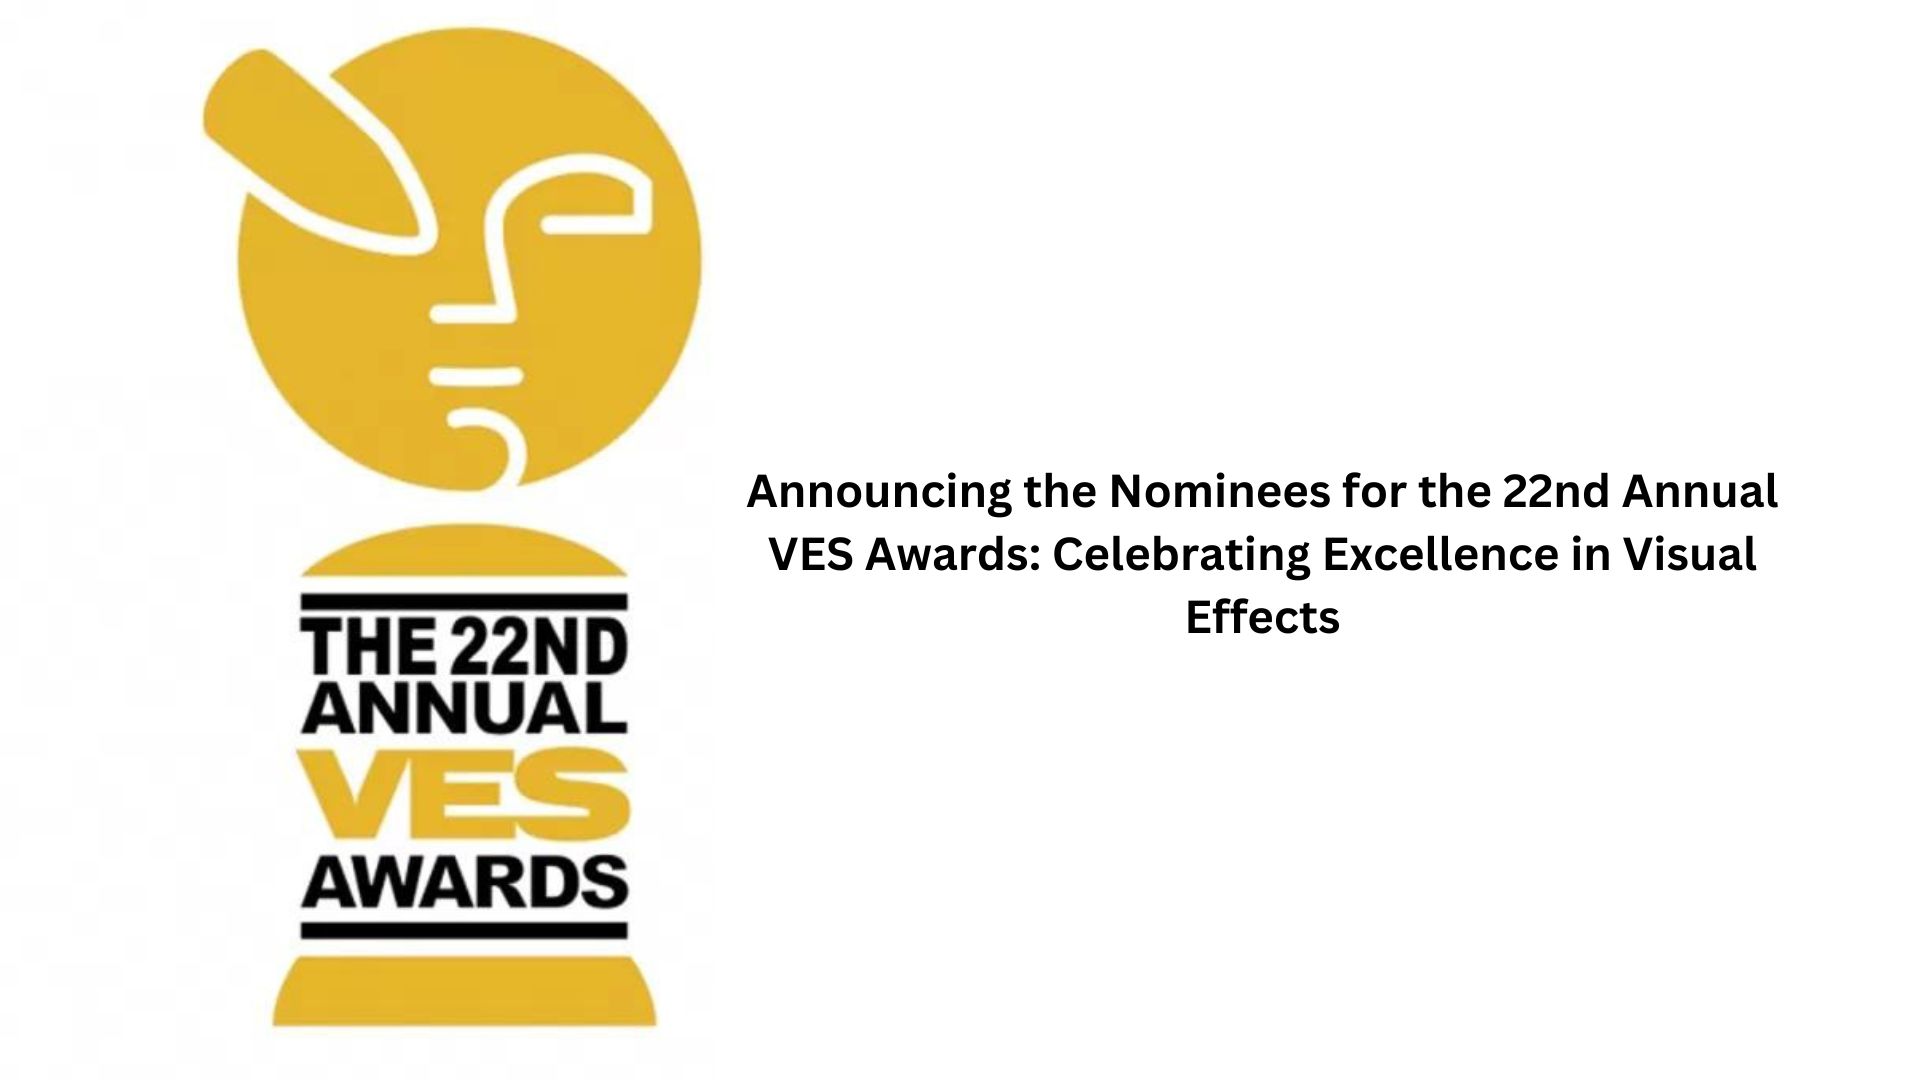 Announcing the Nominees for the 22nd Annual VES Awards Celebrating